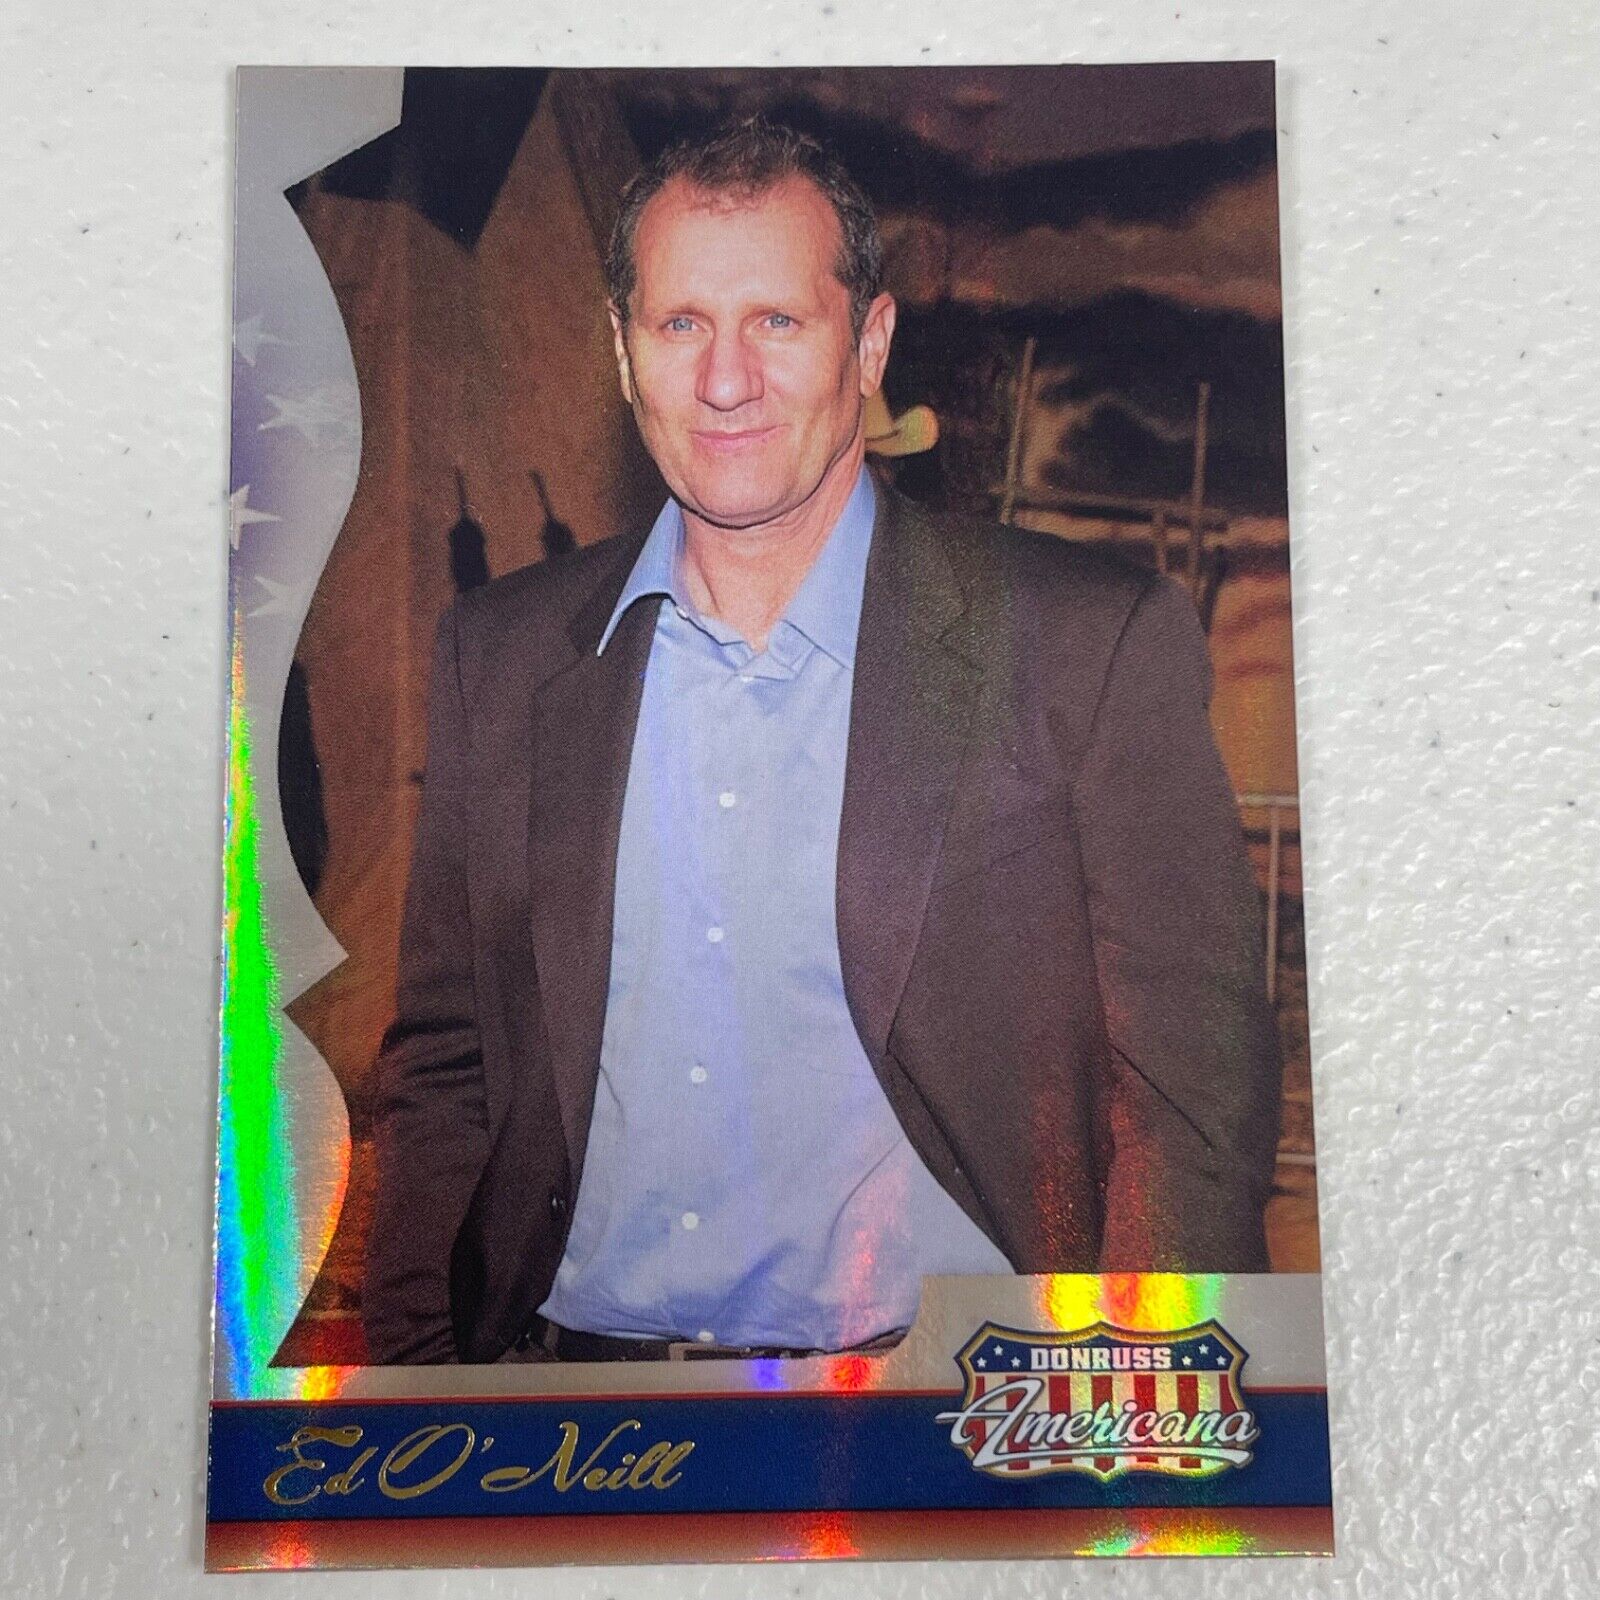 2007 Donruss Americana ED O\'NEILL Foil Card #87 Married With Children Actor